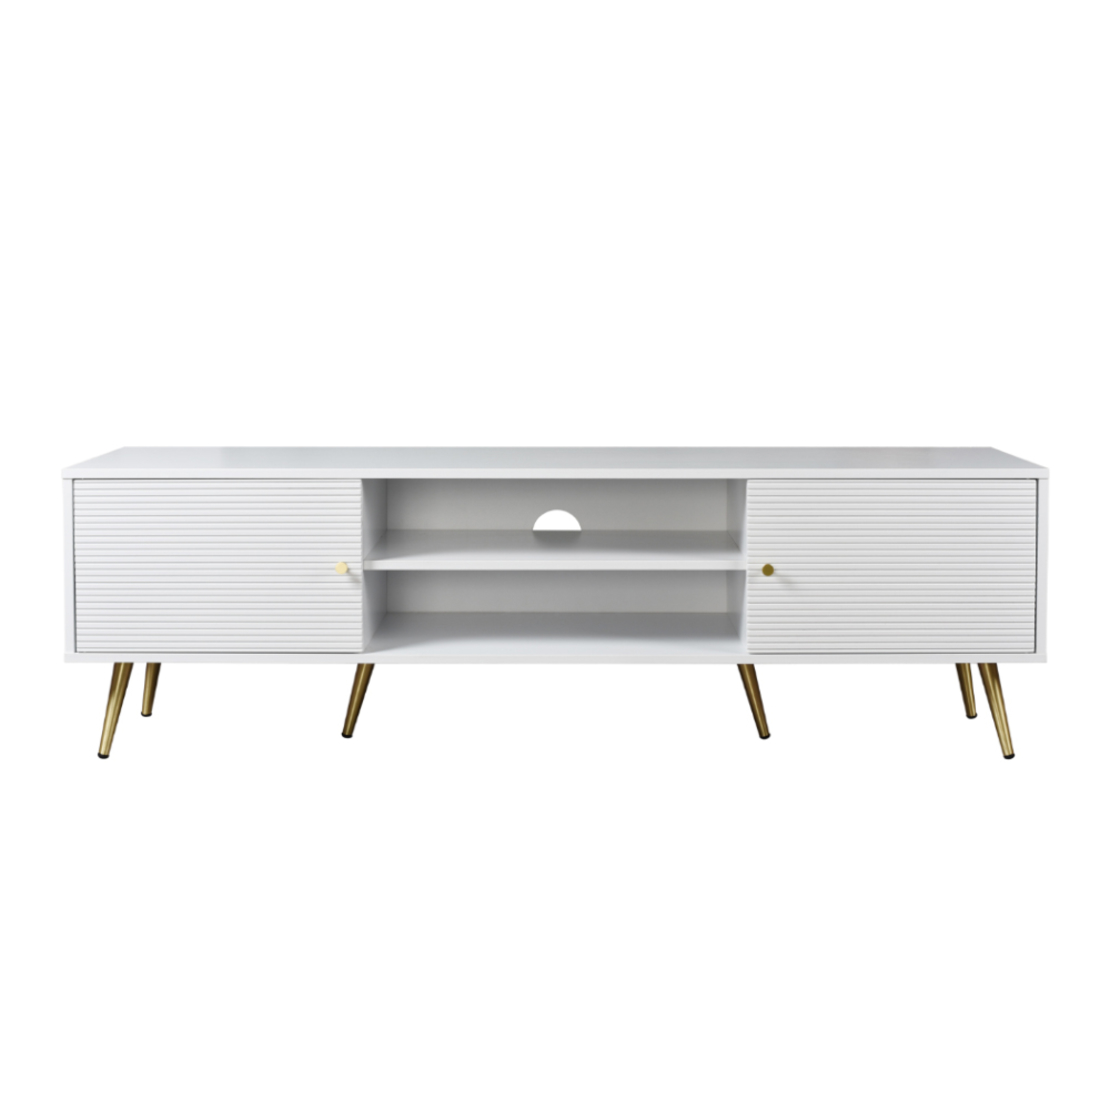 ZIZEL TV STAND 2DOORS CHIPBOARD WITH MELAMINE CARTA WHITE WITH PATTERN GOLD LACQUERED MDF 160x39xH49cm E1 PRC